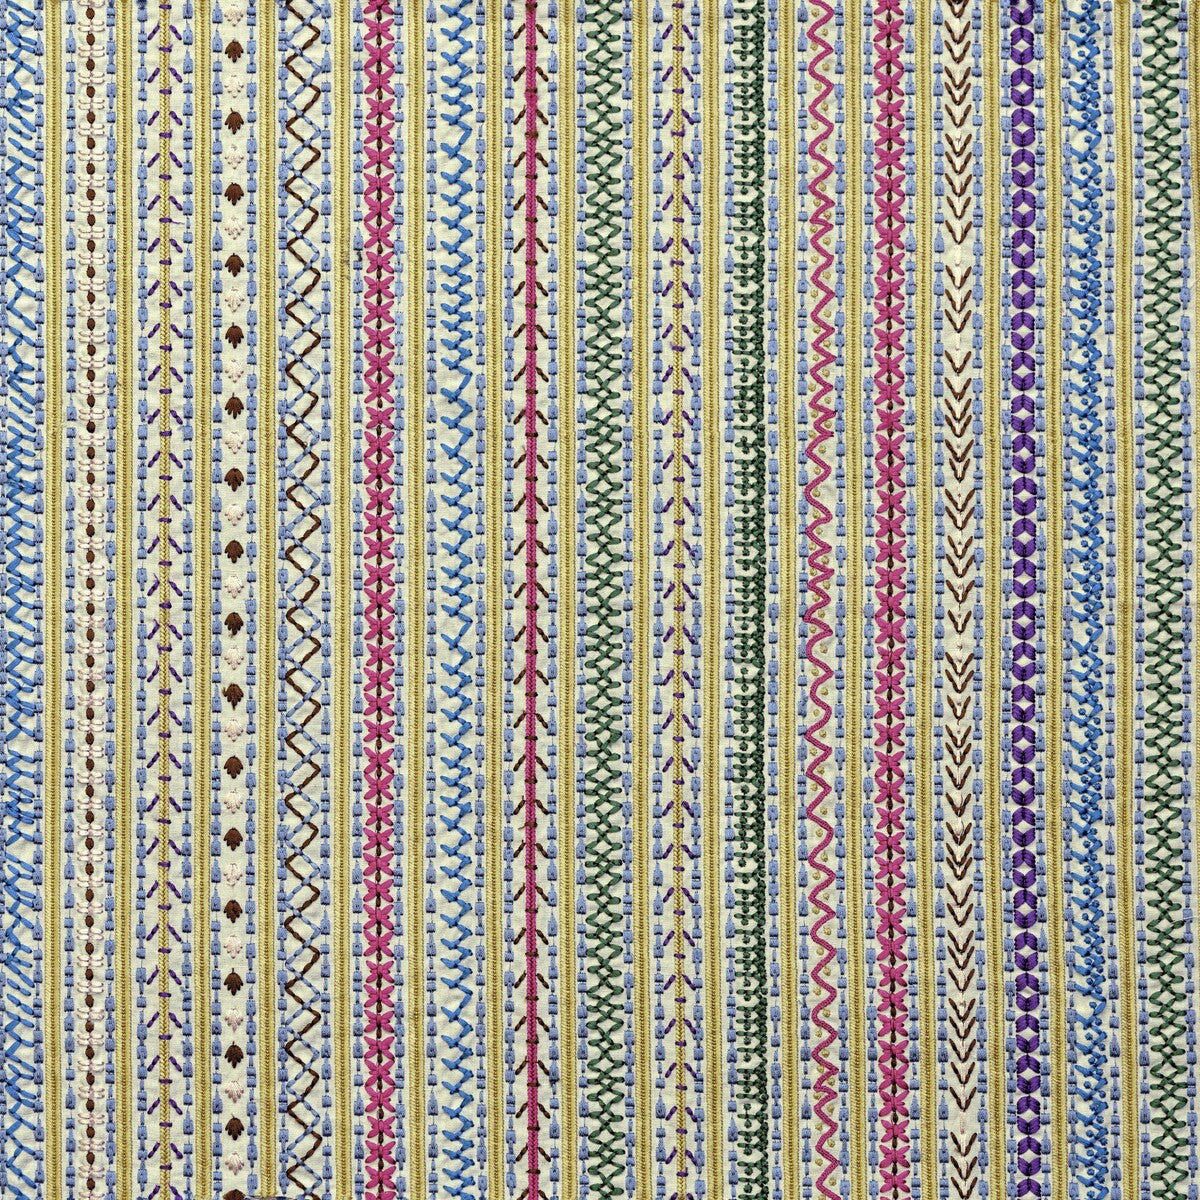 Capri fabric in yellow/multi color - pattern BFC-3680.457.0 - by Lee Jofa in the Blithfield collection